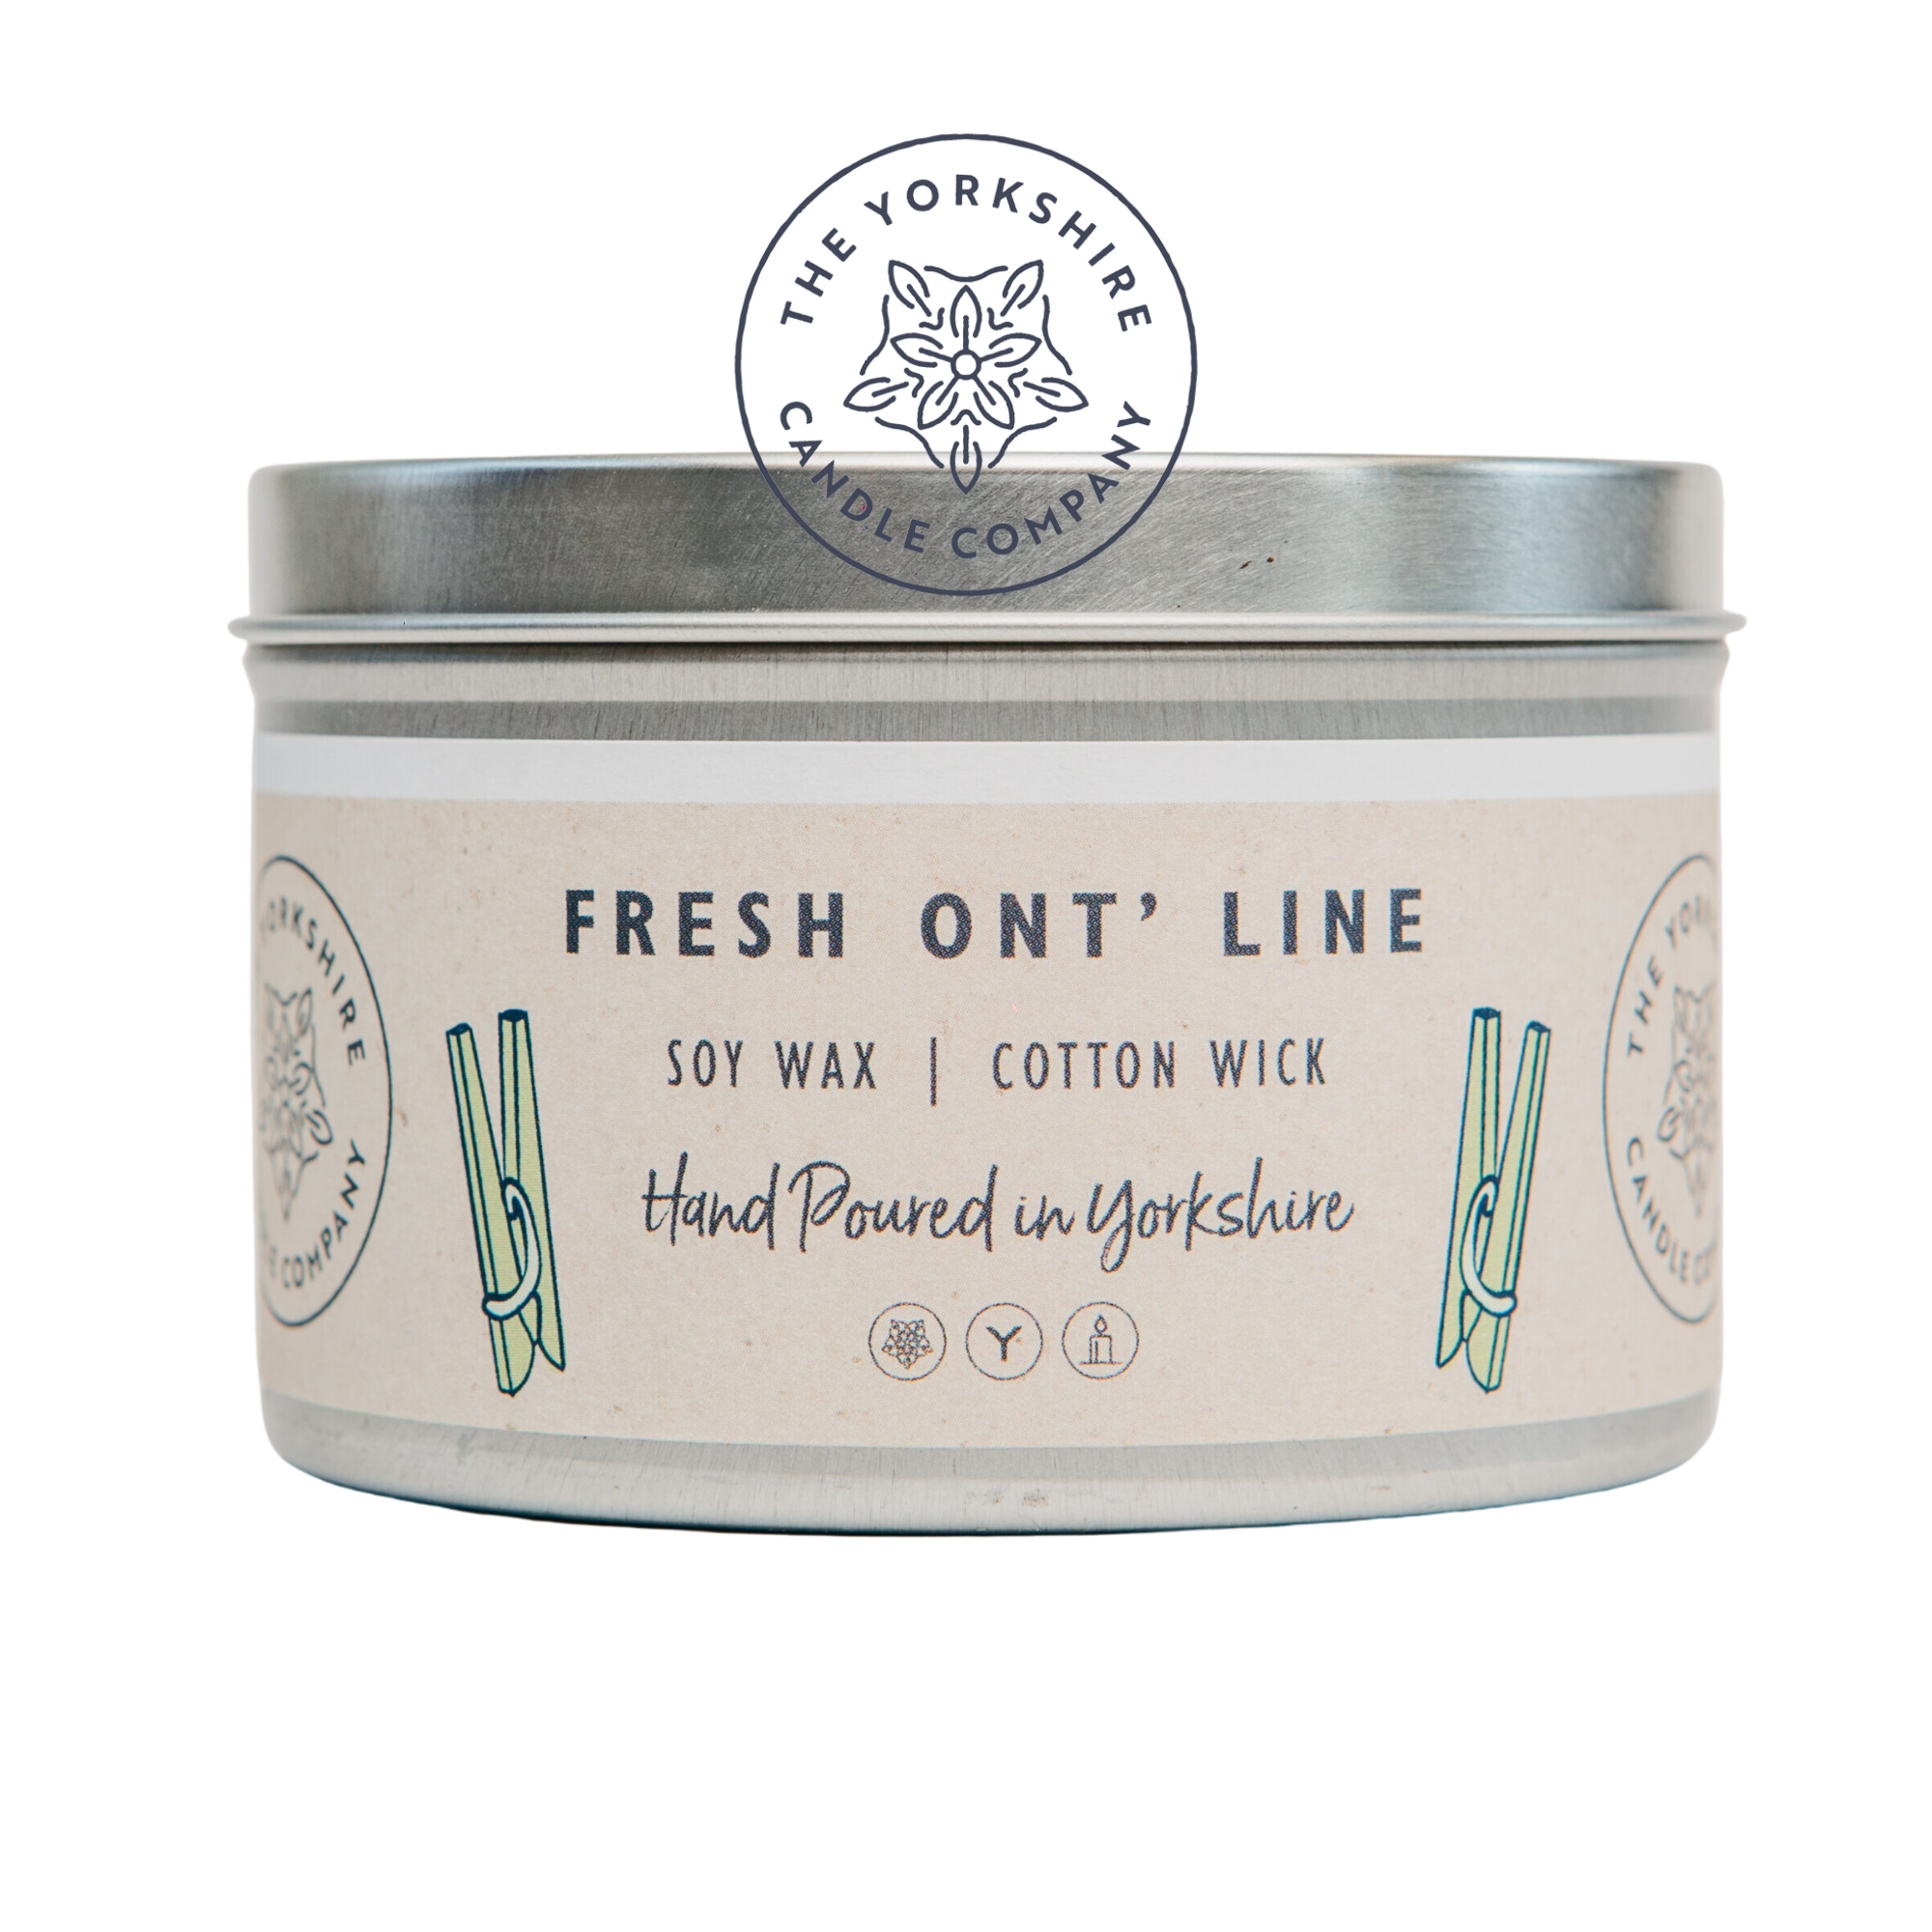 Fresh ont’ Line - Soy Wax Cotton Wick Hand Poured Candle by The Yorkshire Candle Company